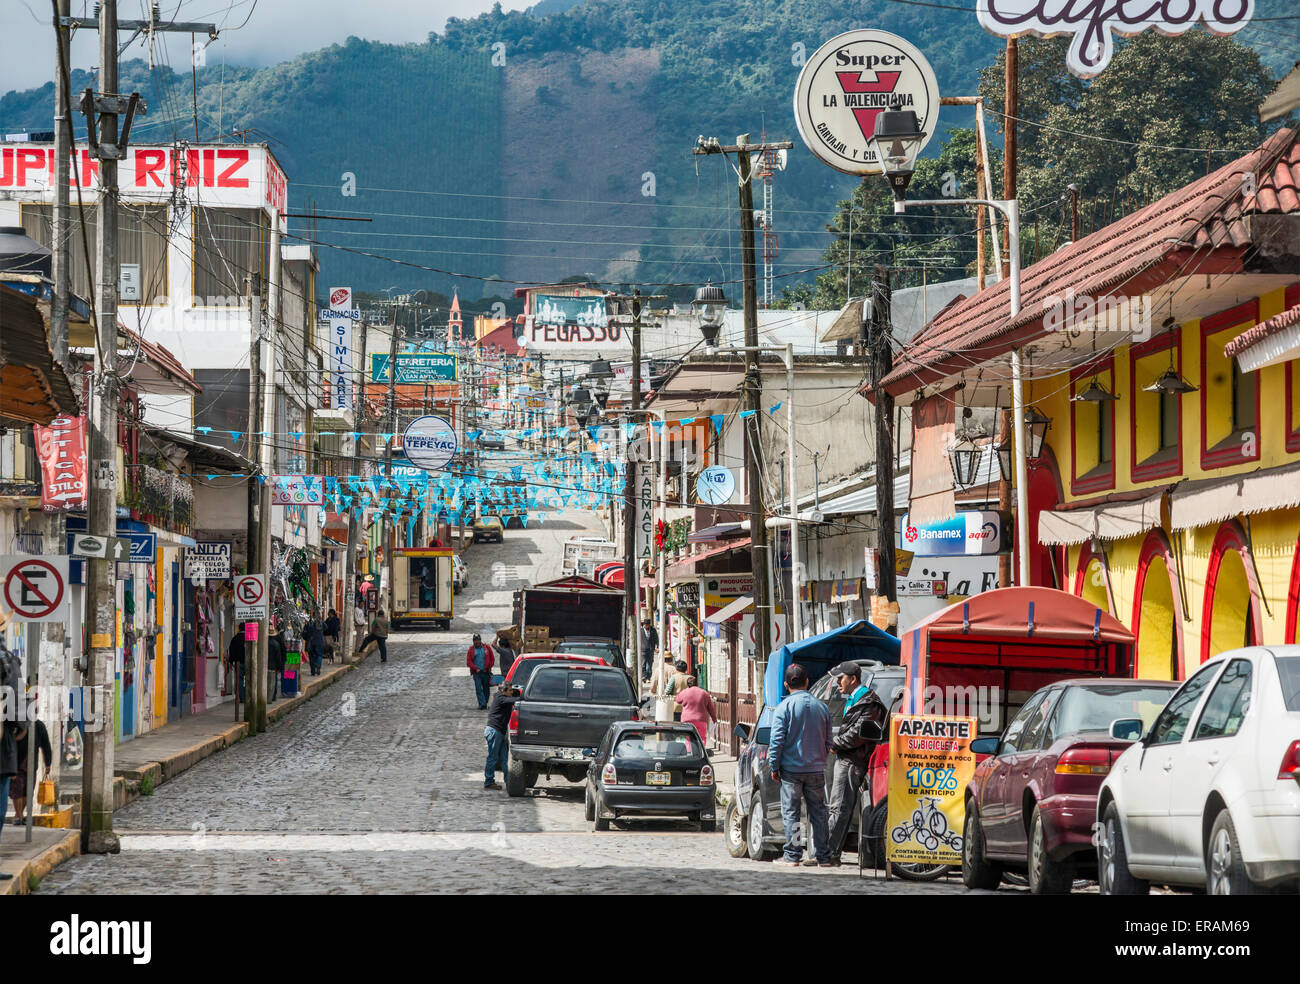 Avenida Nicholas Bravo, cobbled street with utility cables overhead,  decorated with pennants, in Coscomatepec, Veracruz, Mexico Stock Photo -  Alamy